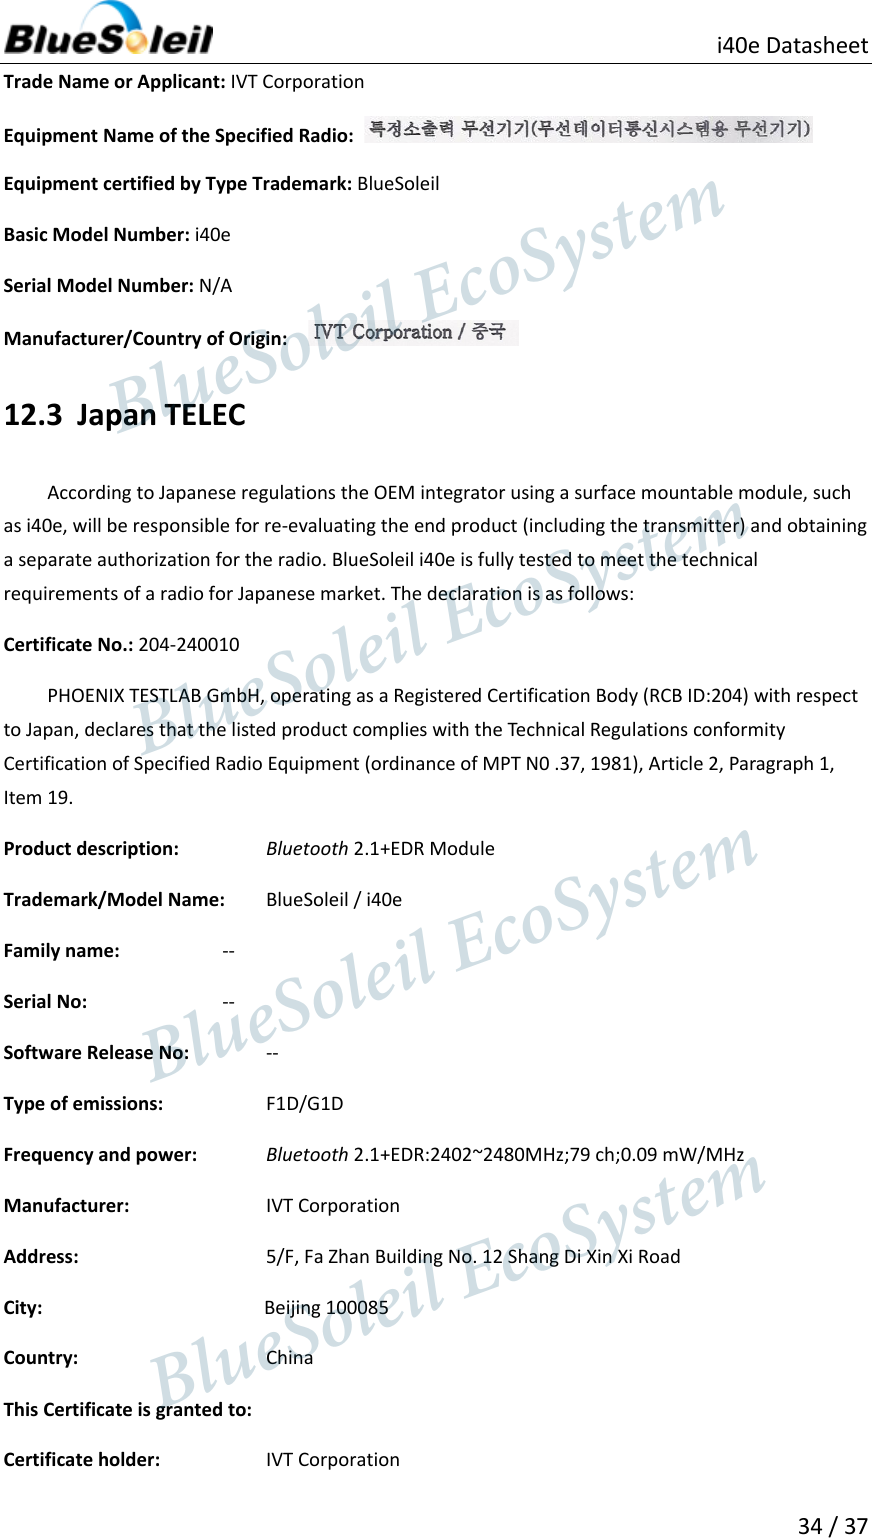                          i40e Datasheet  34 / 37  Trade Name or Applicant: IVT Corporation Equipment Name of the Specified Radio:     Equipment certified by Type Trademark: BlueSoleil Basic Model Number: i40e Serial Model Number: N/A Manufacturer/Country of Origin:    12.3 Japan TELEC According to Japanese regulations the OEM integrator using a surface mountable module, such as i40e, will be responsible for re-evaluating the end product (including the transmitter) and obtaining a separate authorization for the radio. BlueSoleil i40e is fully tested to meet the technical requirements of a radio for Japanese market. The declaration is as follows: Certificate No.: 204-240010 PHOENIX TESTLAB GmbH, operating as a Registered Certification Body (RCB ID:204) with respect to Japan, declares that the listed product complies with the Technical Regulations conformity Certification of Specified Radio Equipment (ordinance of MPT N0 .37, 1981), Article 2, Paragraph 1, Item 19. Product description:    Bluetooth 2.1+EDR Module Trademark/Model Name:    BlueSoleil / i40e Family name:     -- Serial No:    -- Software Release No:    -- Type of emissions:      F1D/G1D Frequency and power:    Bluetooth 2.1+EDR:2402~2480MHz;79 ch;0.09 mW/MHz Manufacturer:       IVT Corporation Address:          5/F, Fa Zhan Building No. 12 Shang Di Xin Xi Road City:                 Beijing 100085 Country:          China This Certificate is granted to: Certificate holder:      IVT Corporation                  BlueSoleil EcoSystem            BlueSoleil EcoSystem      BlueSoleil EcoSystemBlueSoleil EcoSystem